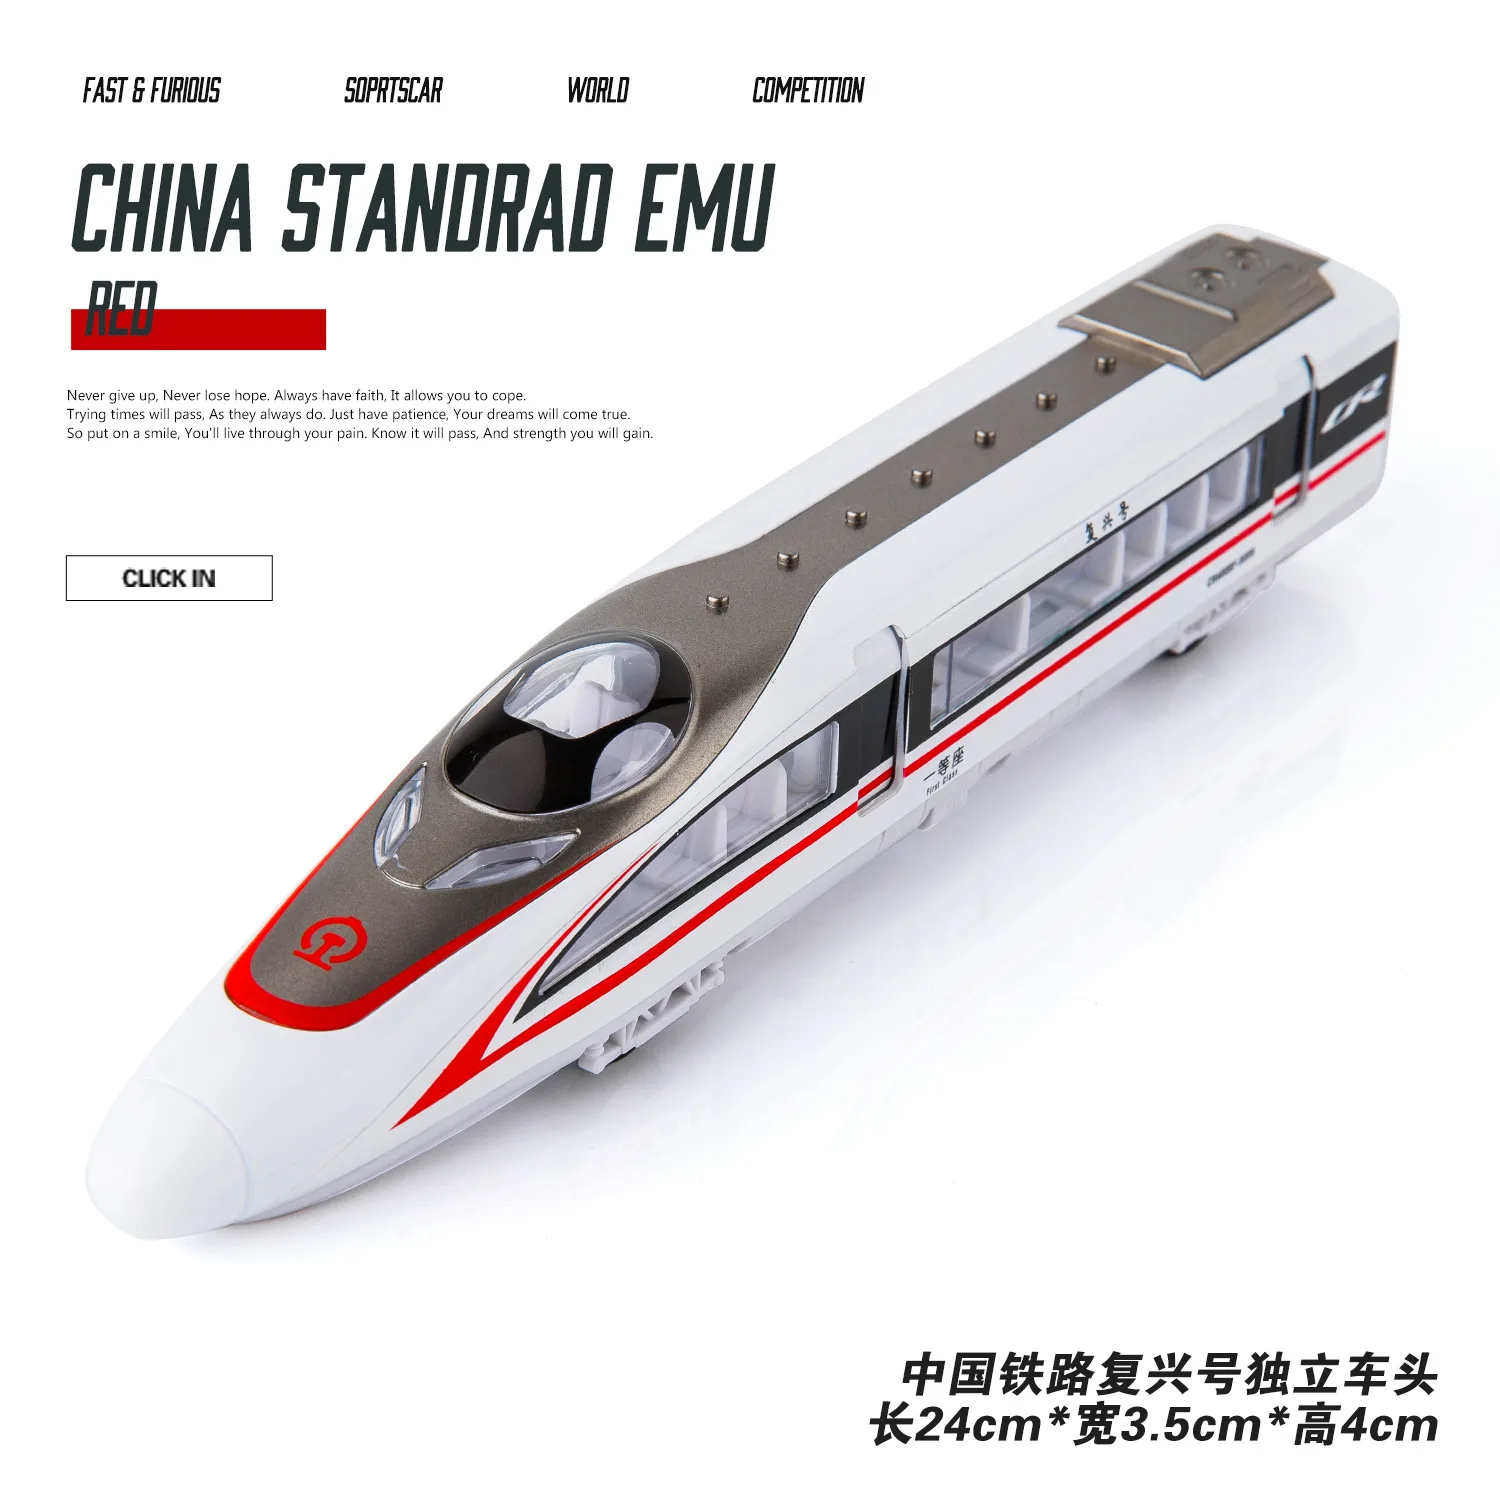 

Boxed Simulation Single Section Double Section Three Section Fuxing Alloy Underground Model Children Moving Car Children's Toy